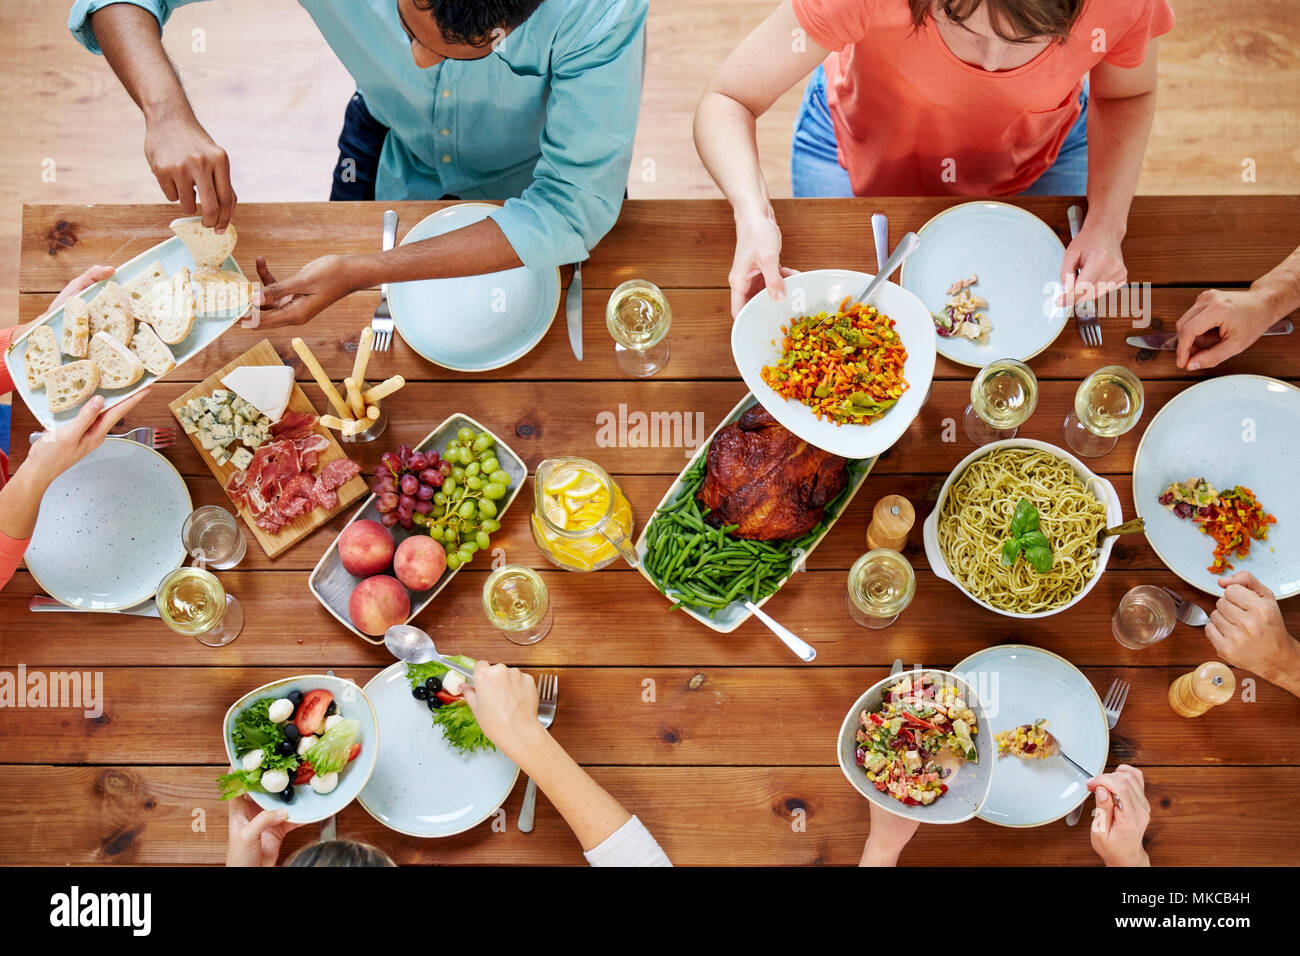 group of people eating at table with food Stock Photo - Alamy